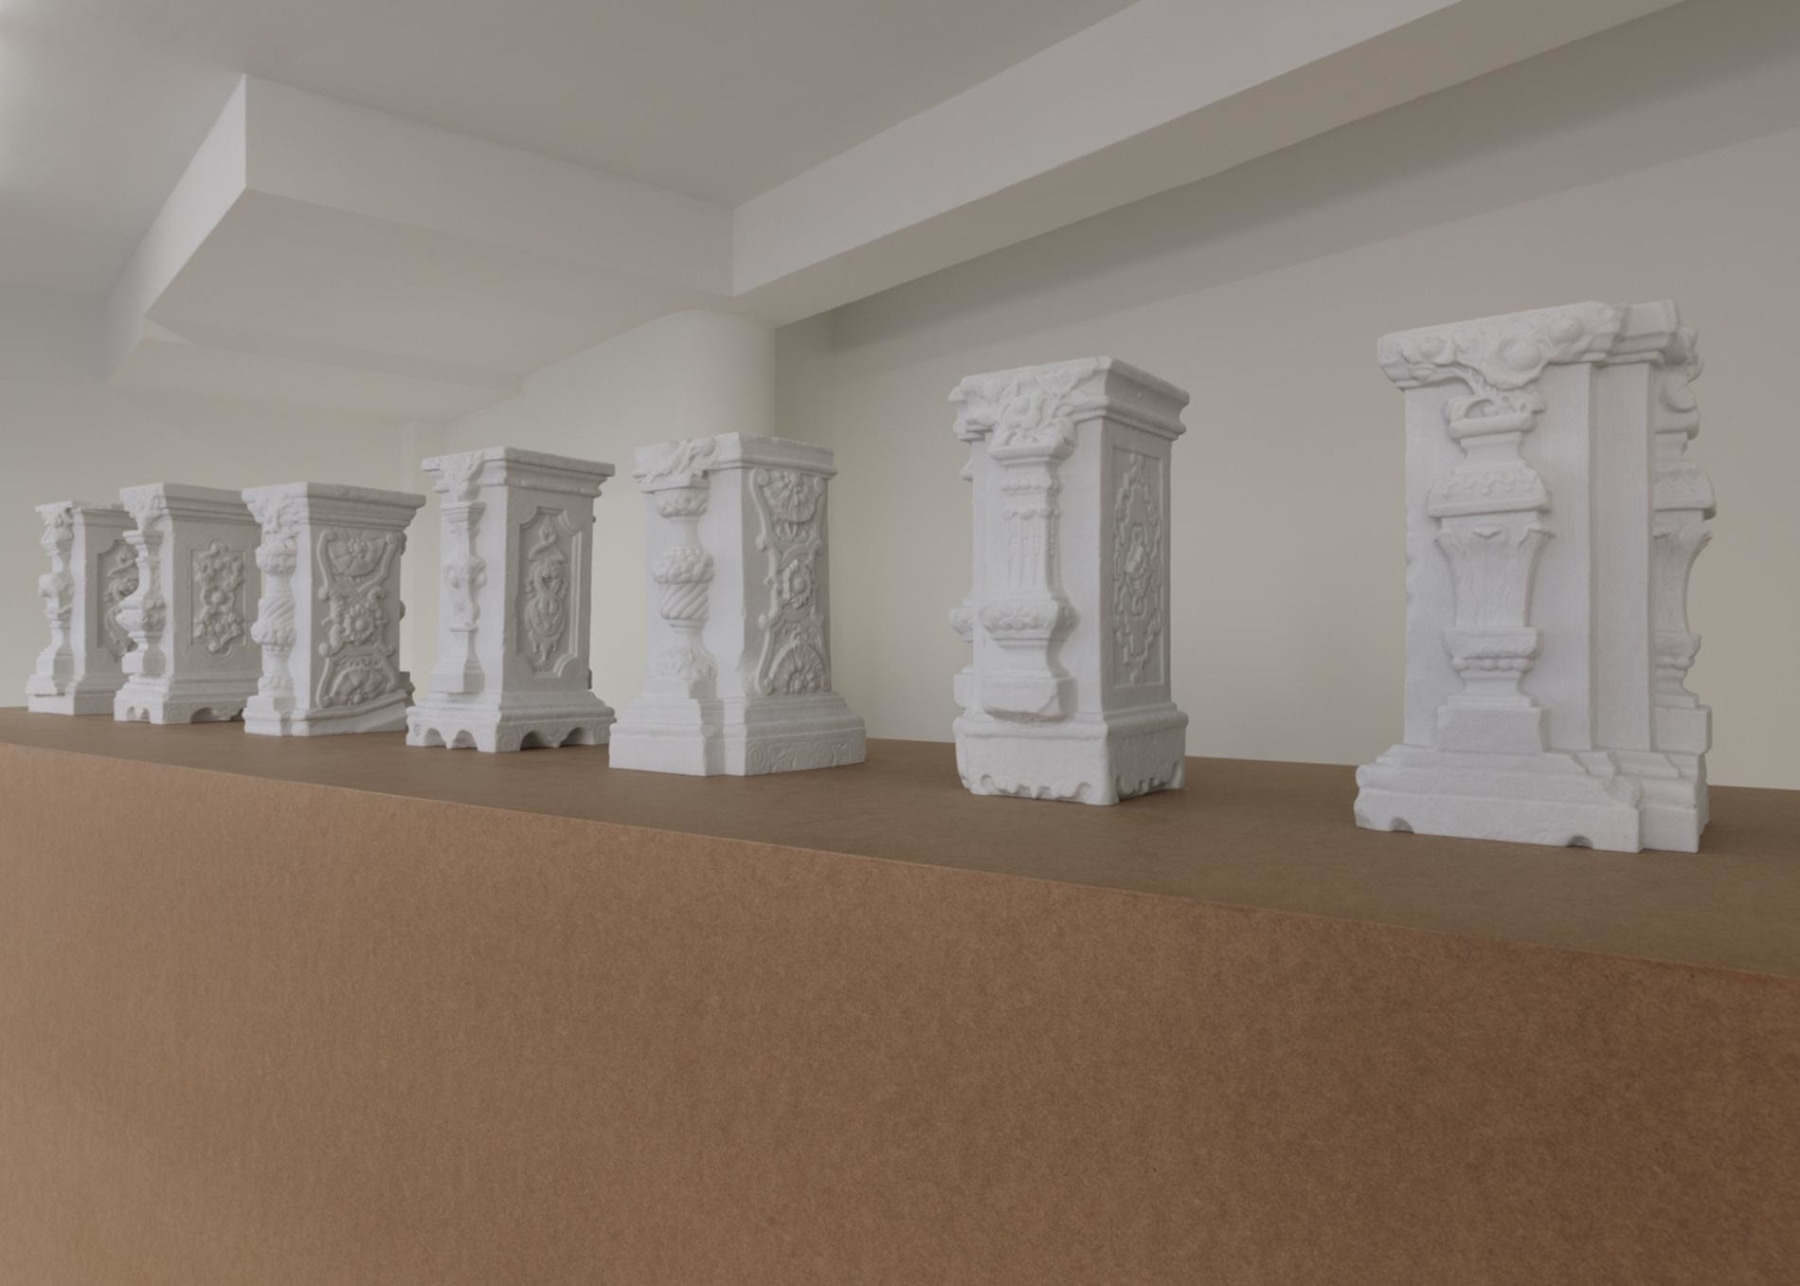 small, white intricately decorated columns